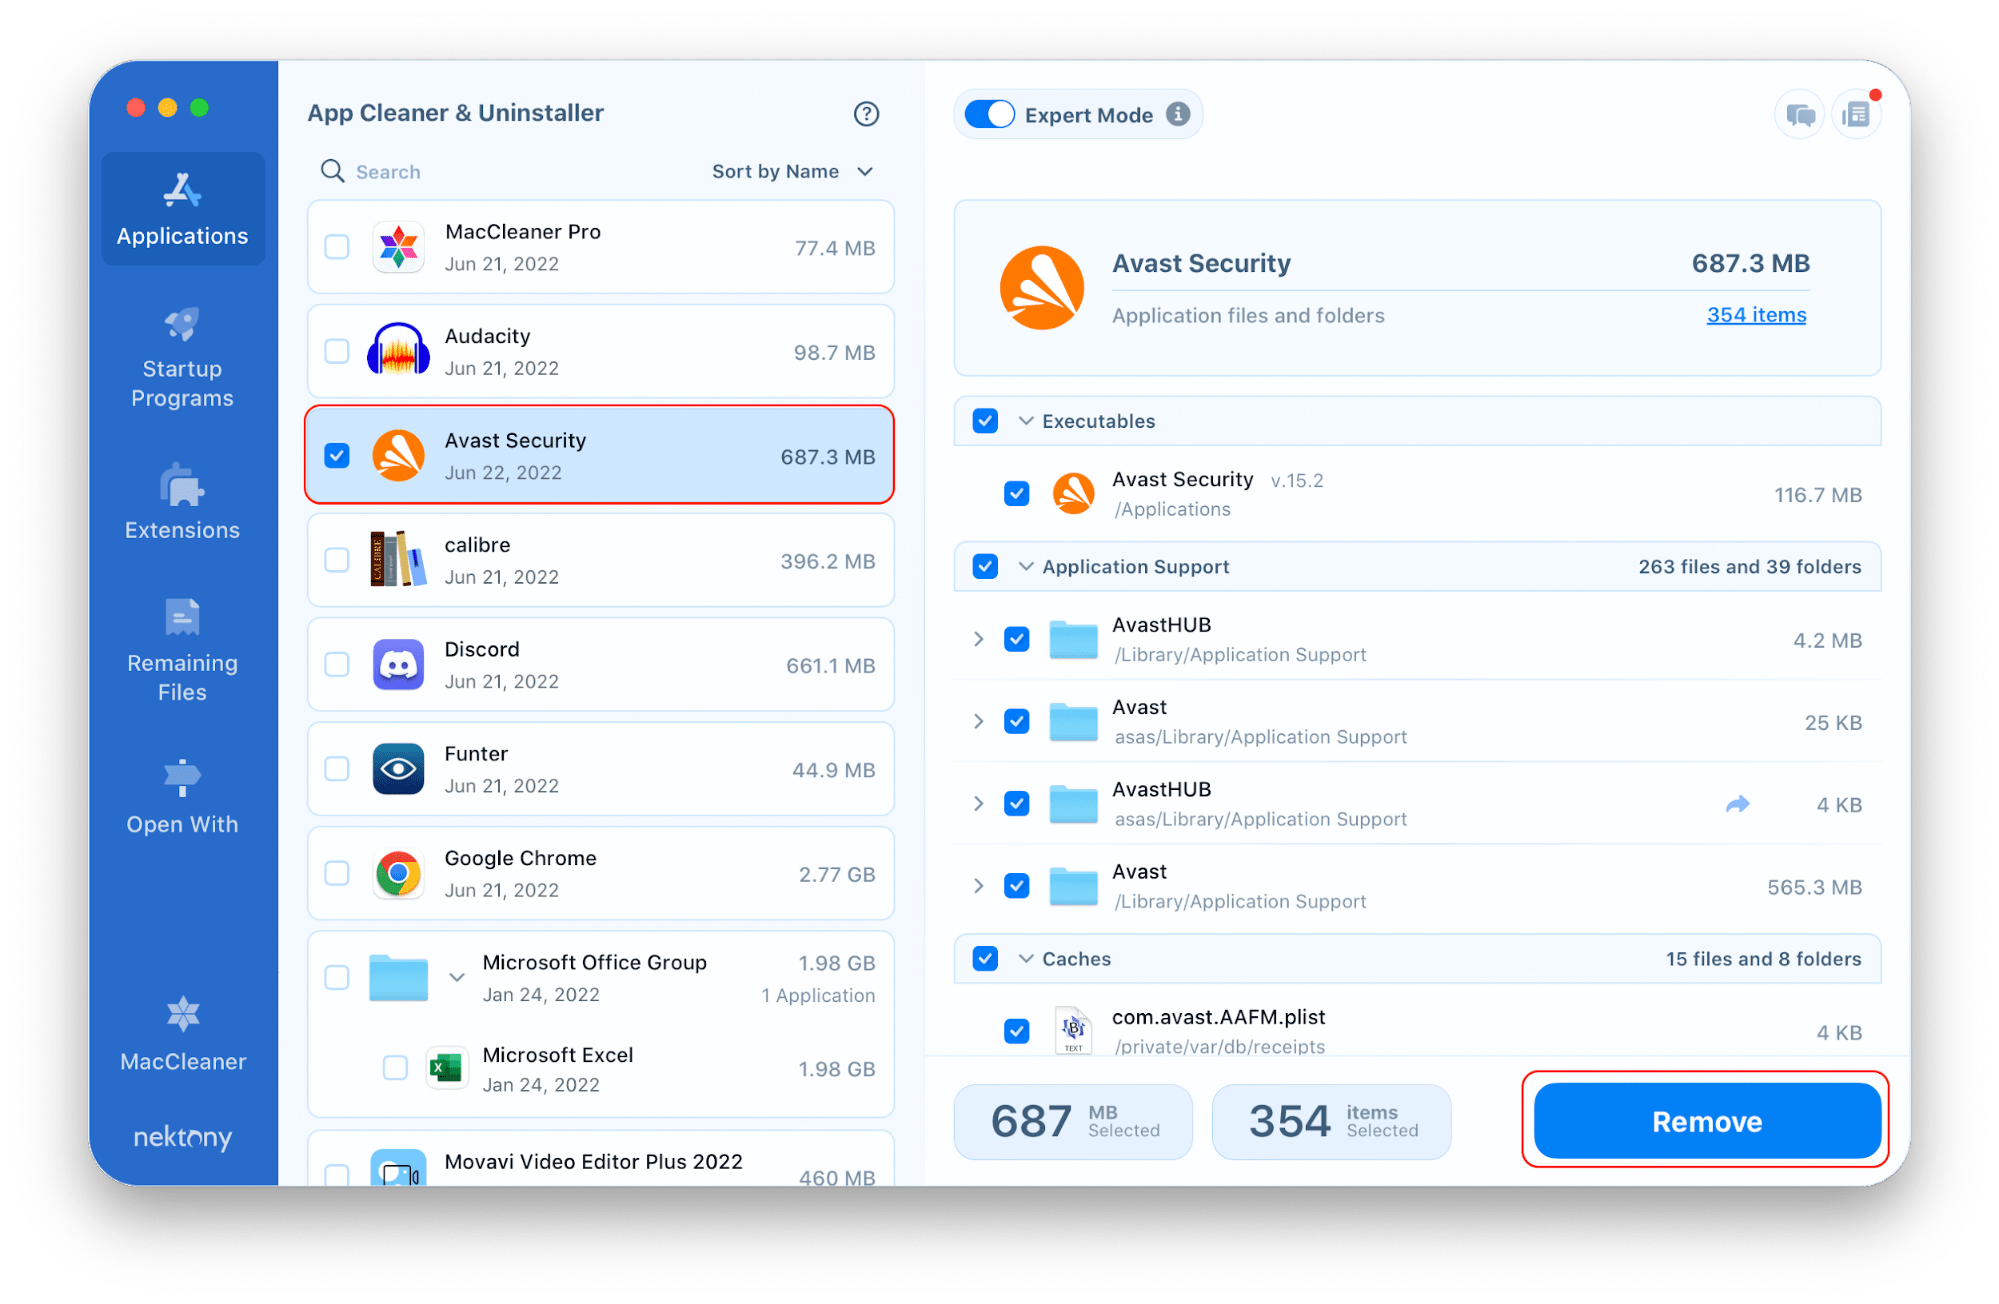 App Cleaner & Uninstaller window with Avast selected for removal